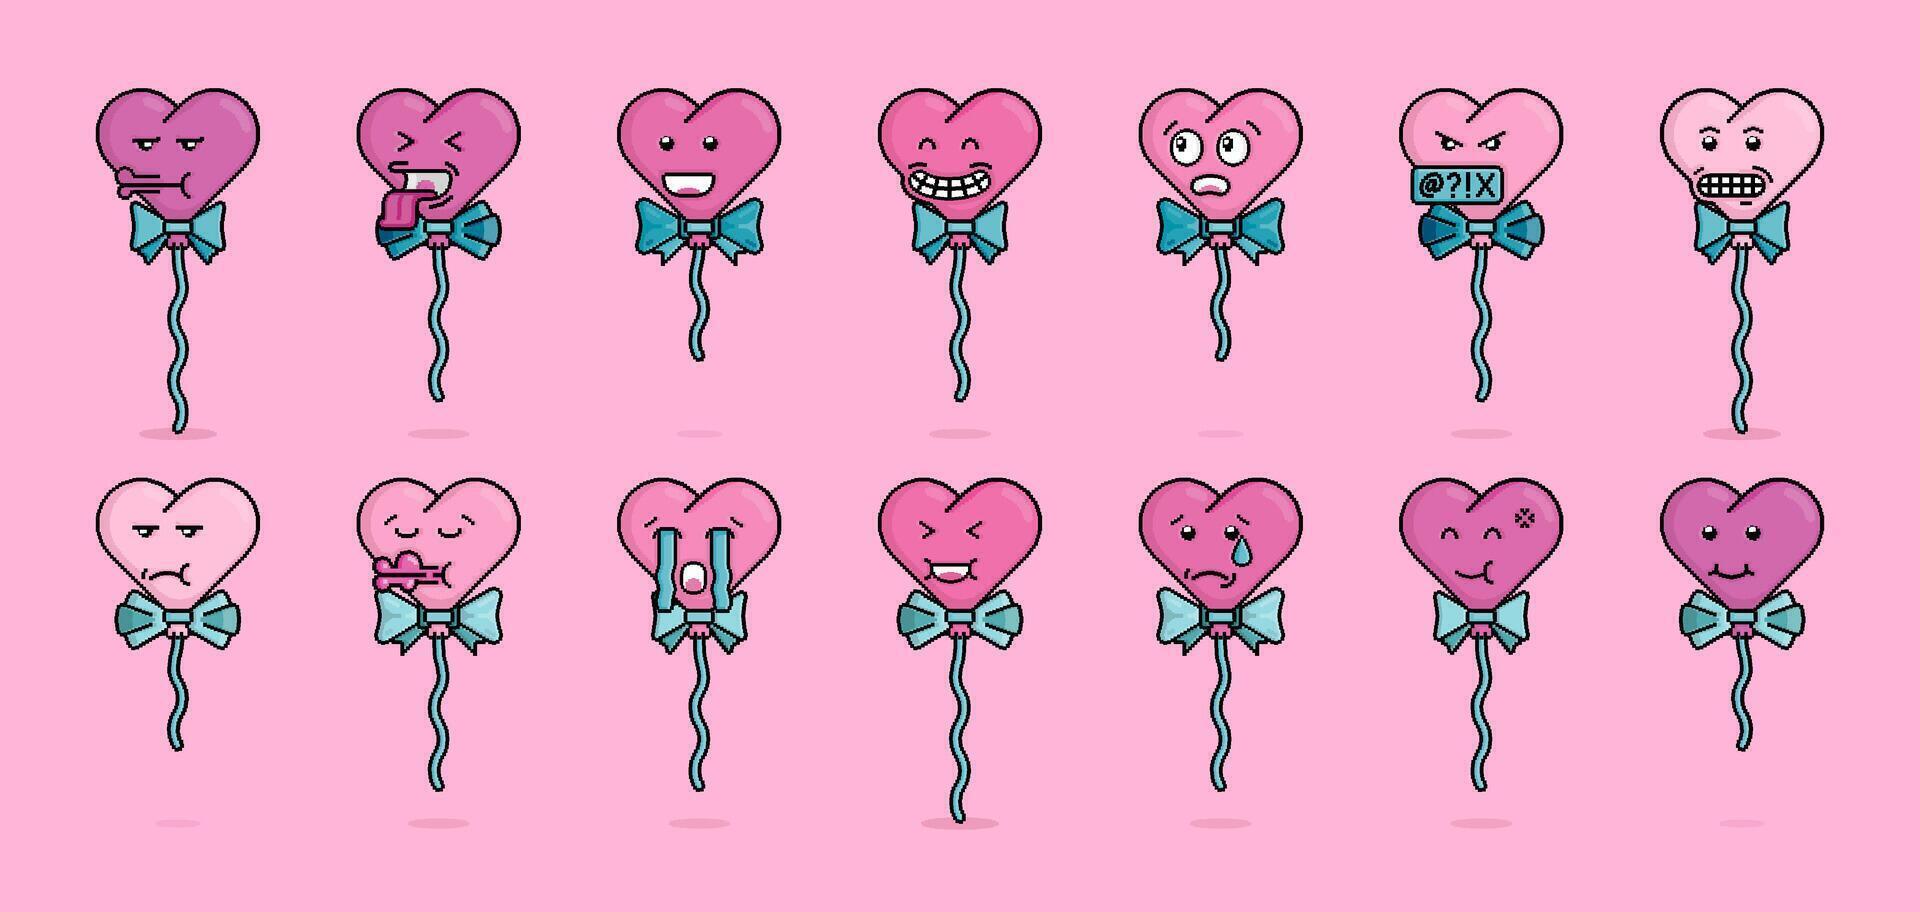 pixel illustration emoji pack of heart shaped balloons with ribbons and strings in various emotion of happiness, sadness, confusion, anger, shock, disbelief. Can be used for merchandise or stickers vector